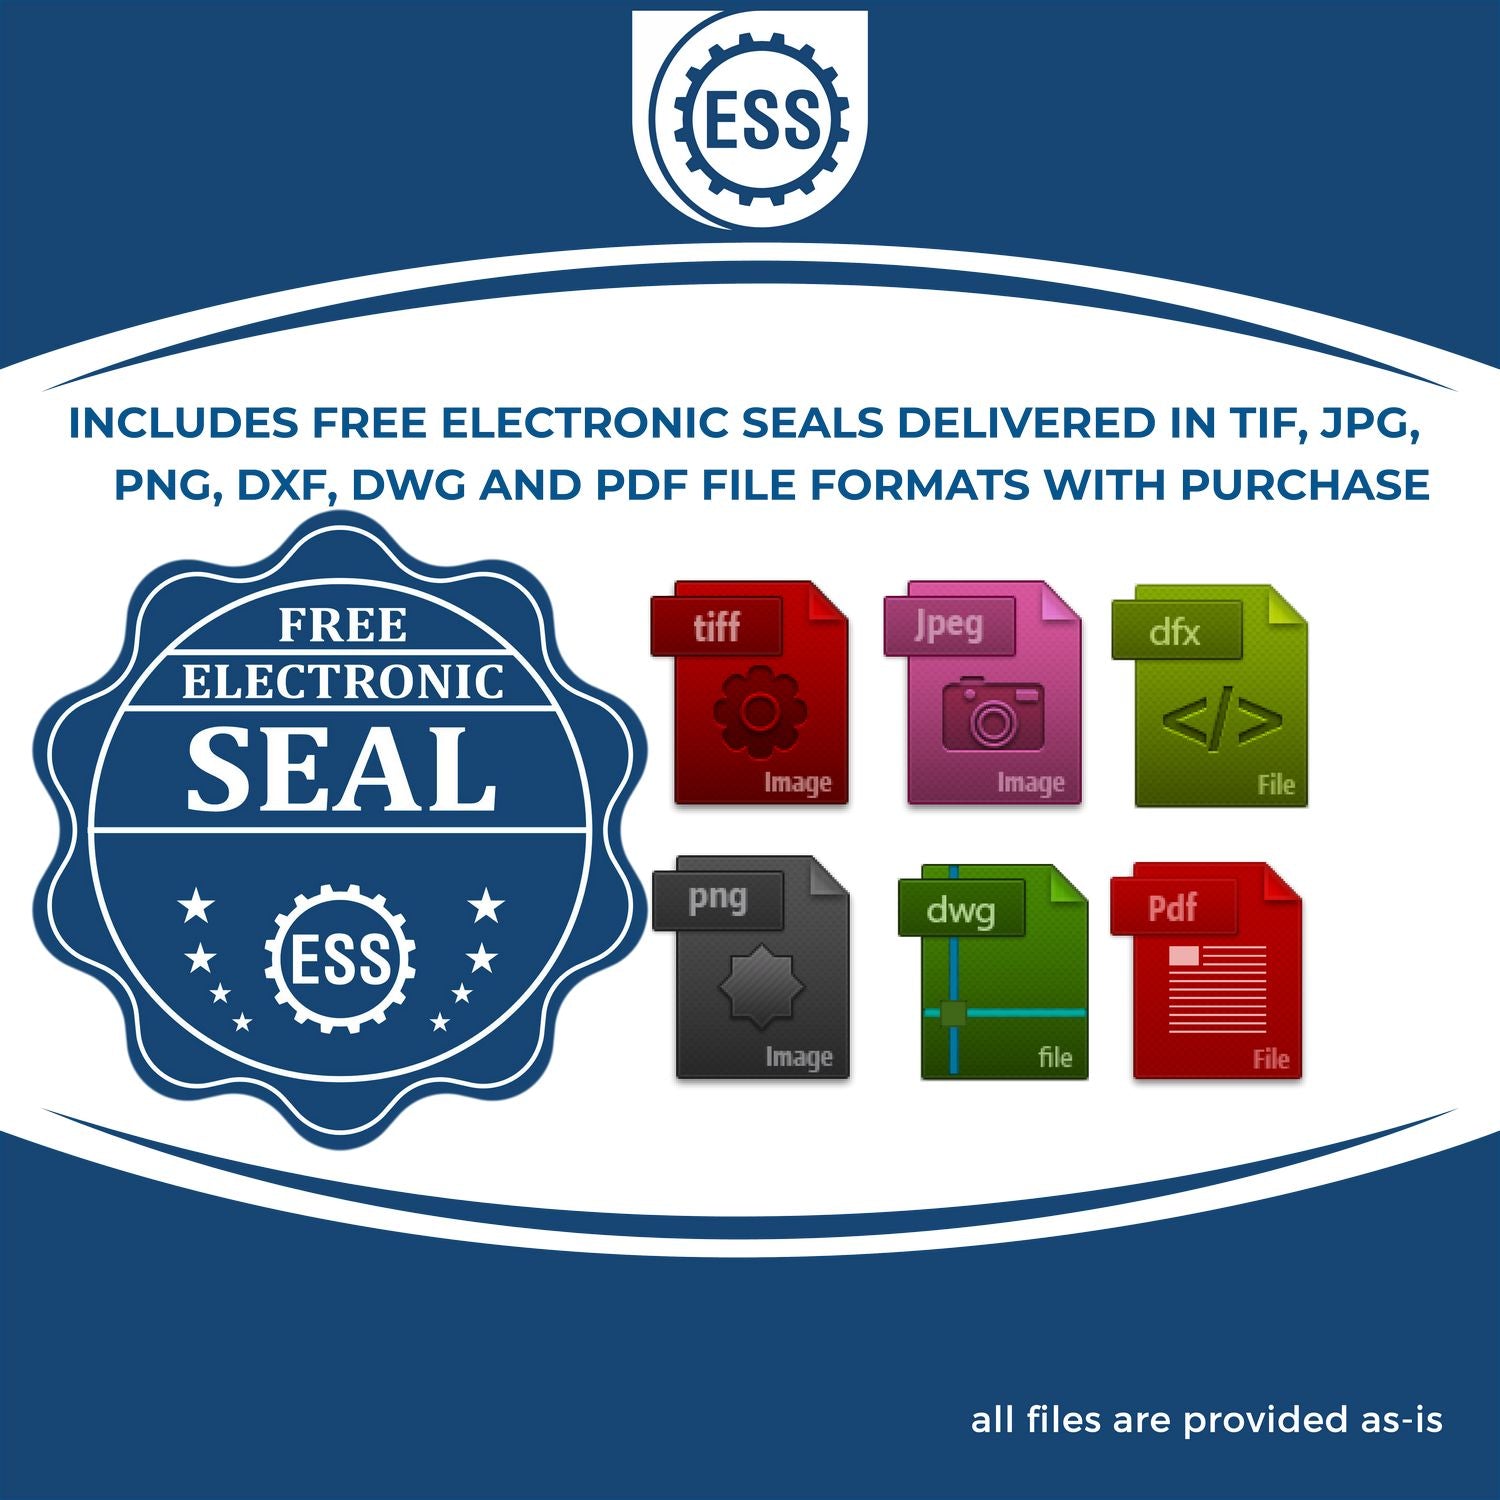 An infographic for the free electronic seal for the Self-Inking Michigan Landscape Architect Stamp illustrating the different file type icons such as DXF, DWG, TIF, JPG and PNG.